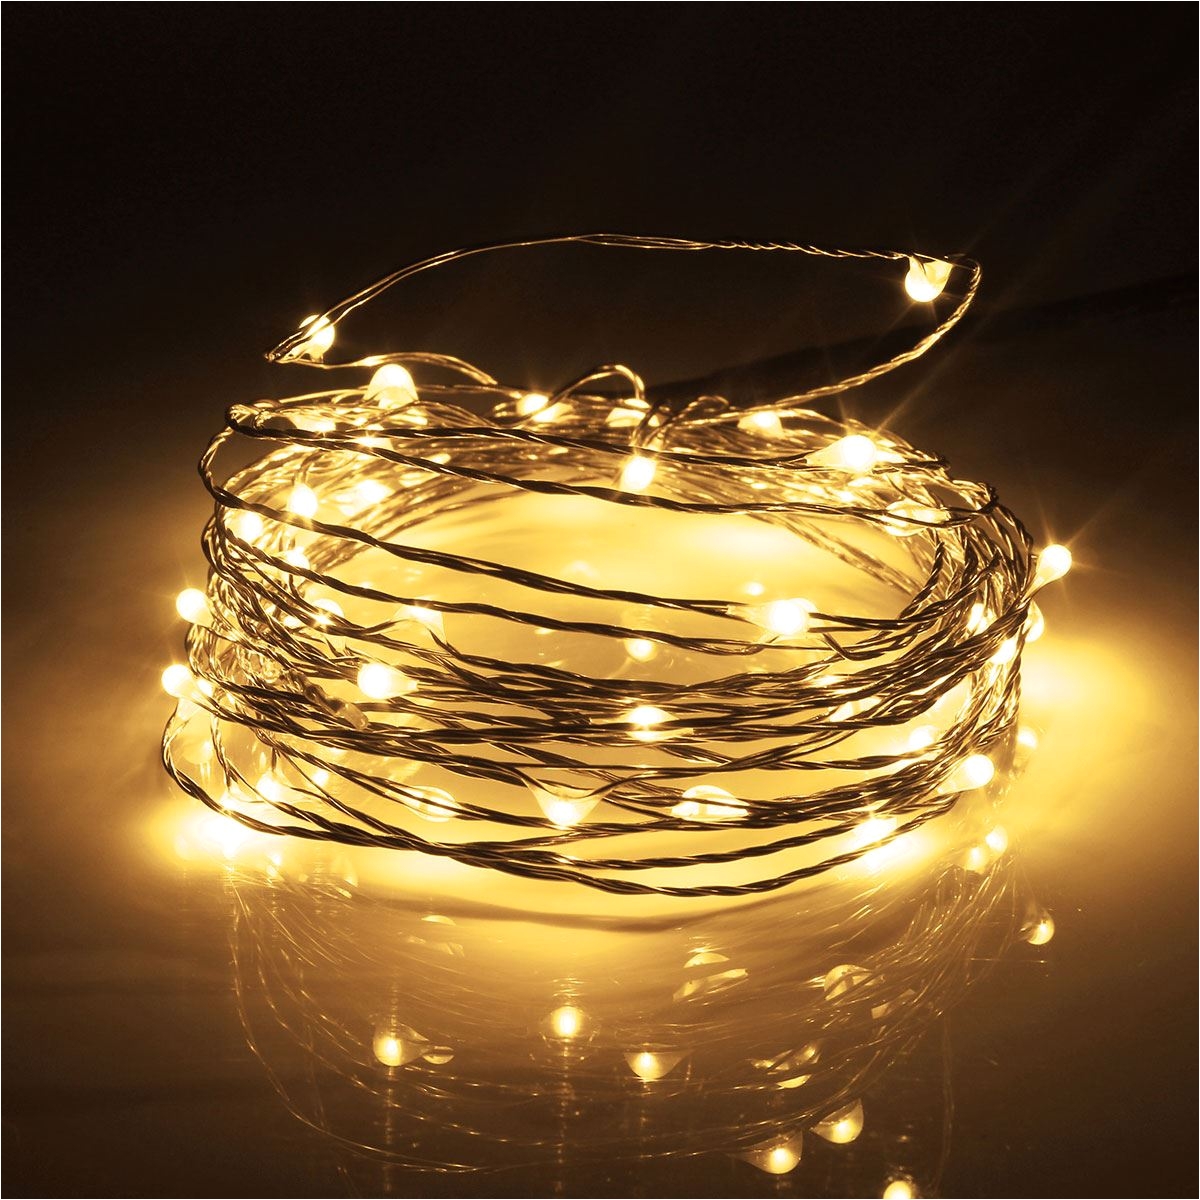 5m usb power operated waterproof copper wire led string light fairy light rgb led strip lamp christmas home party decor in lighting strings from lights